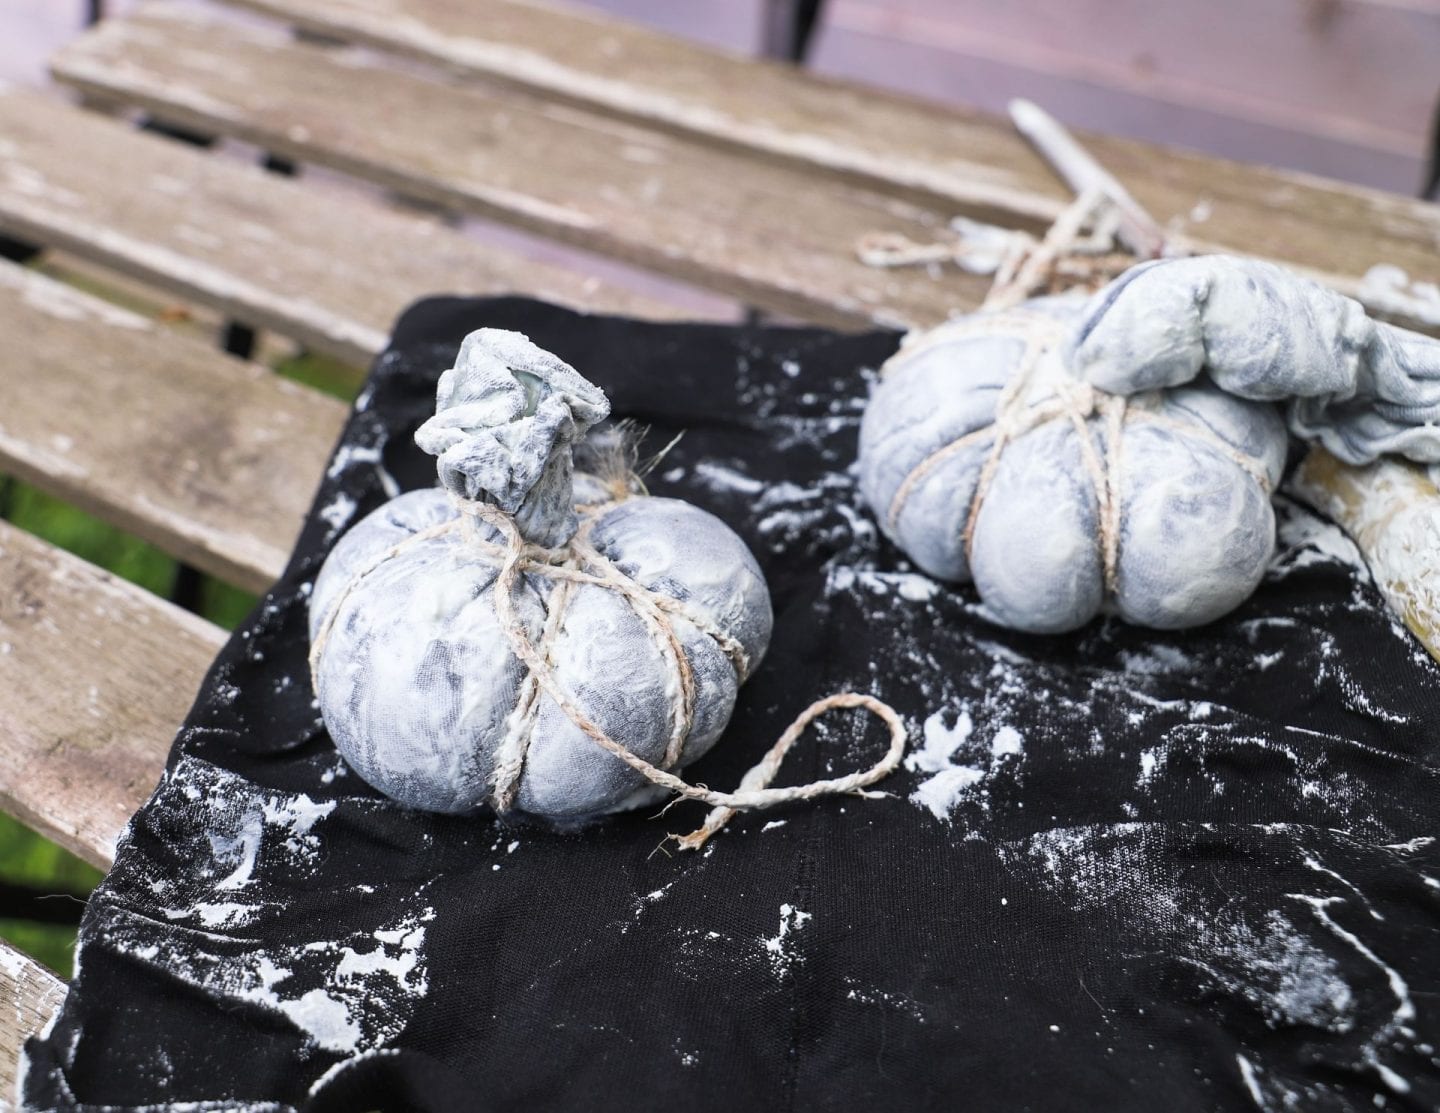 Using cement to make pumpkins